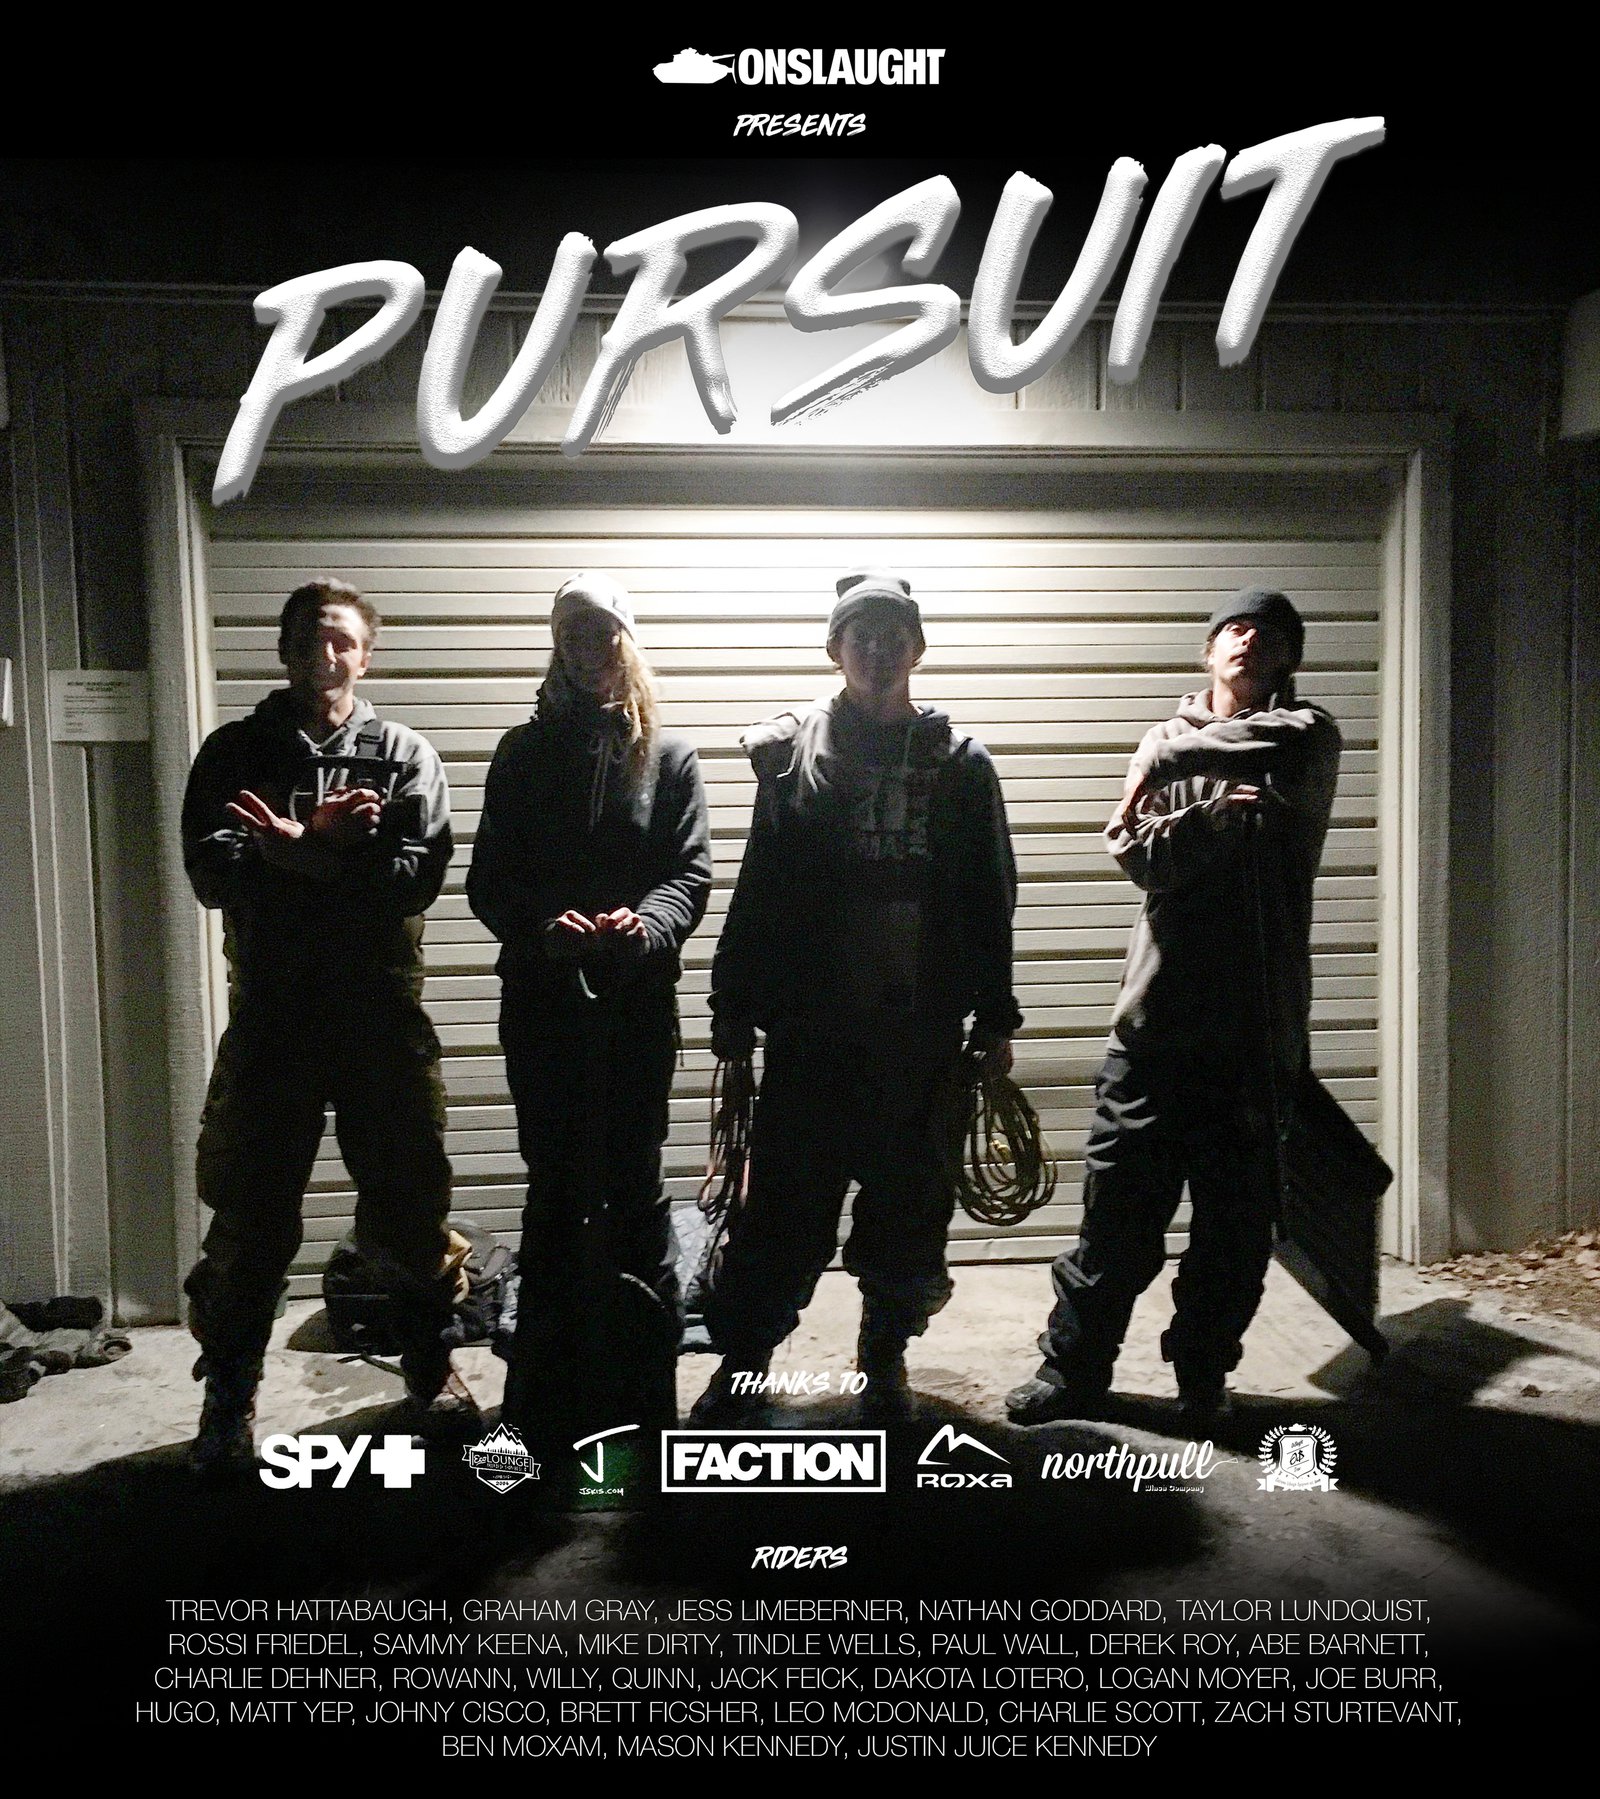 PURTSUIT coming soon...